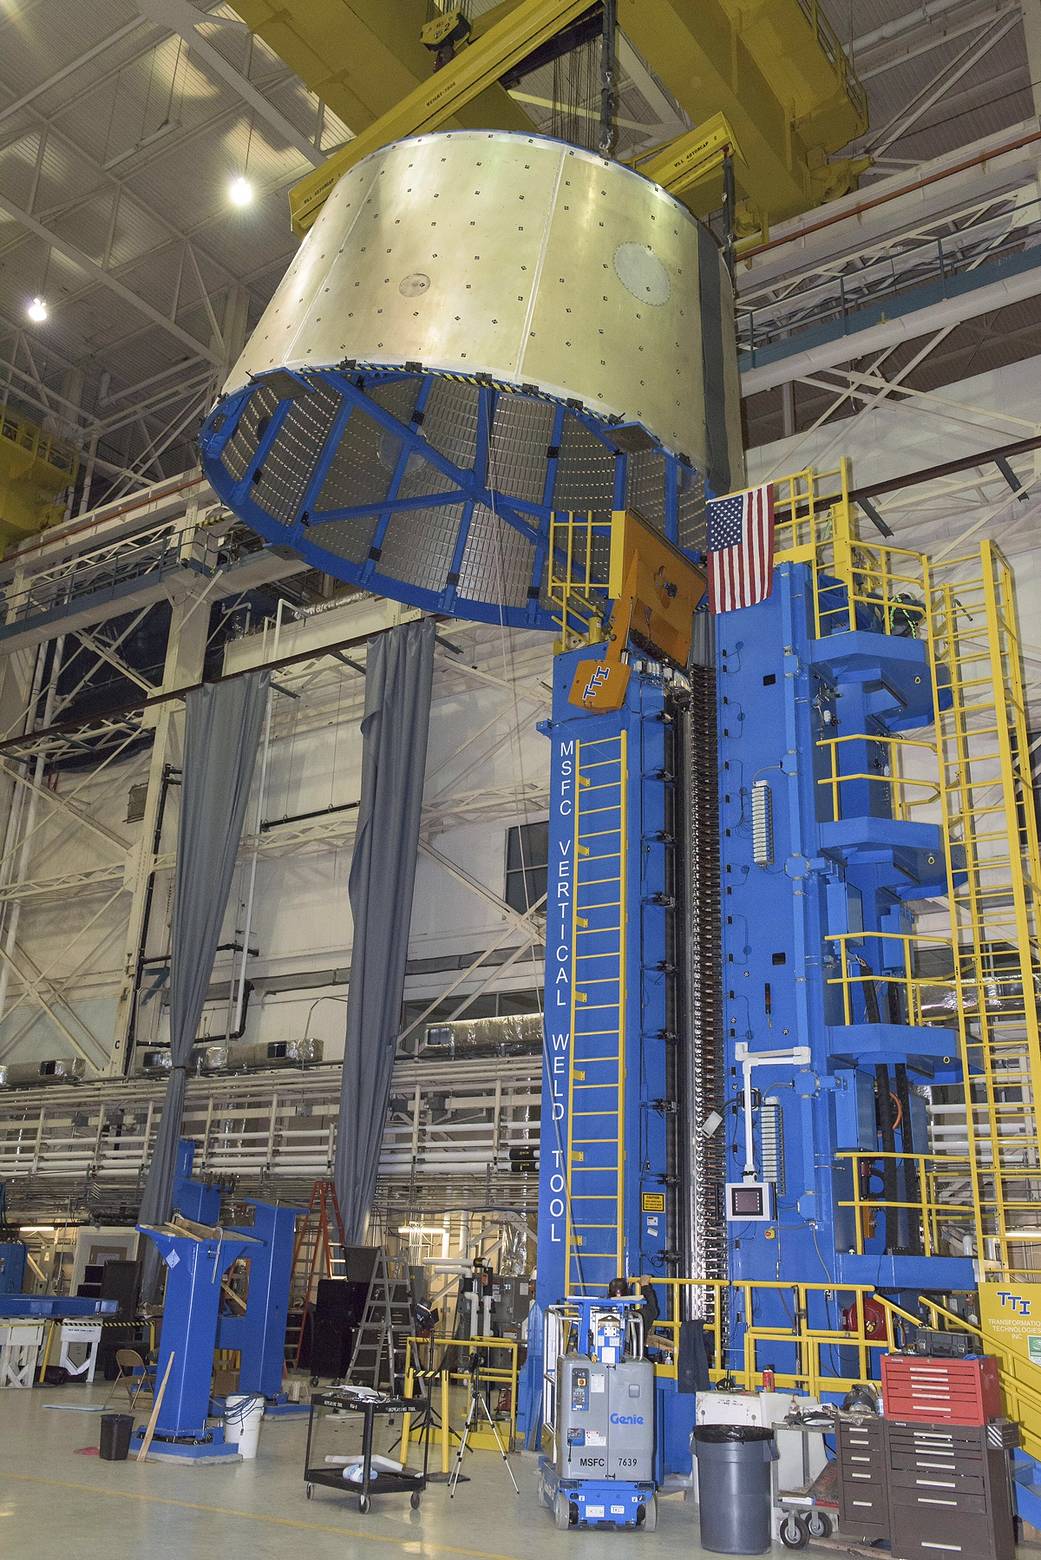 The aft cone, or bottom portion, of a test version of the launch vehicle stage adapter (LVSA) 